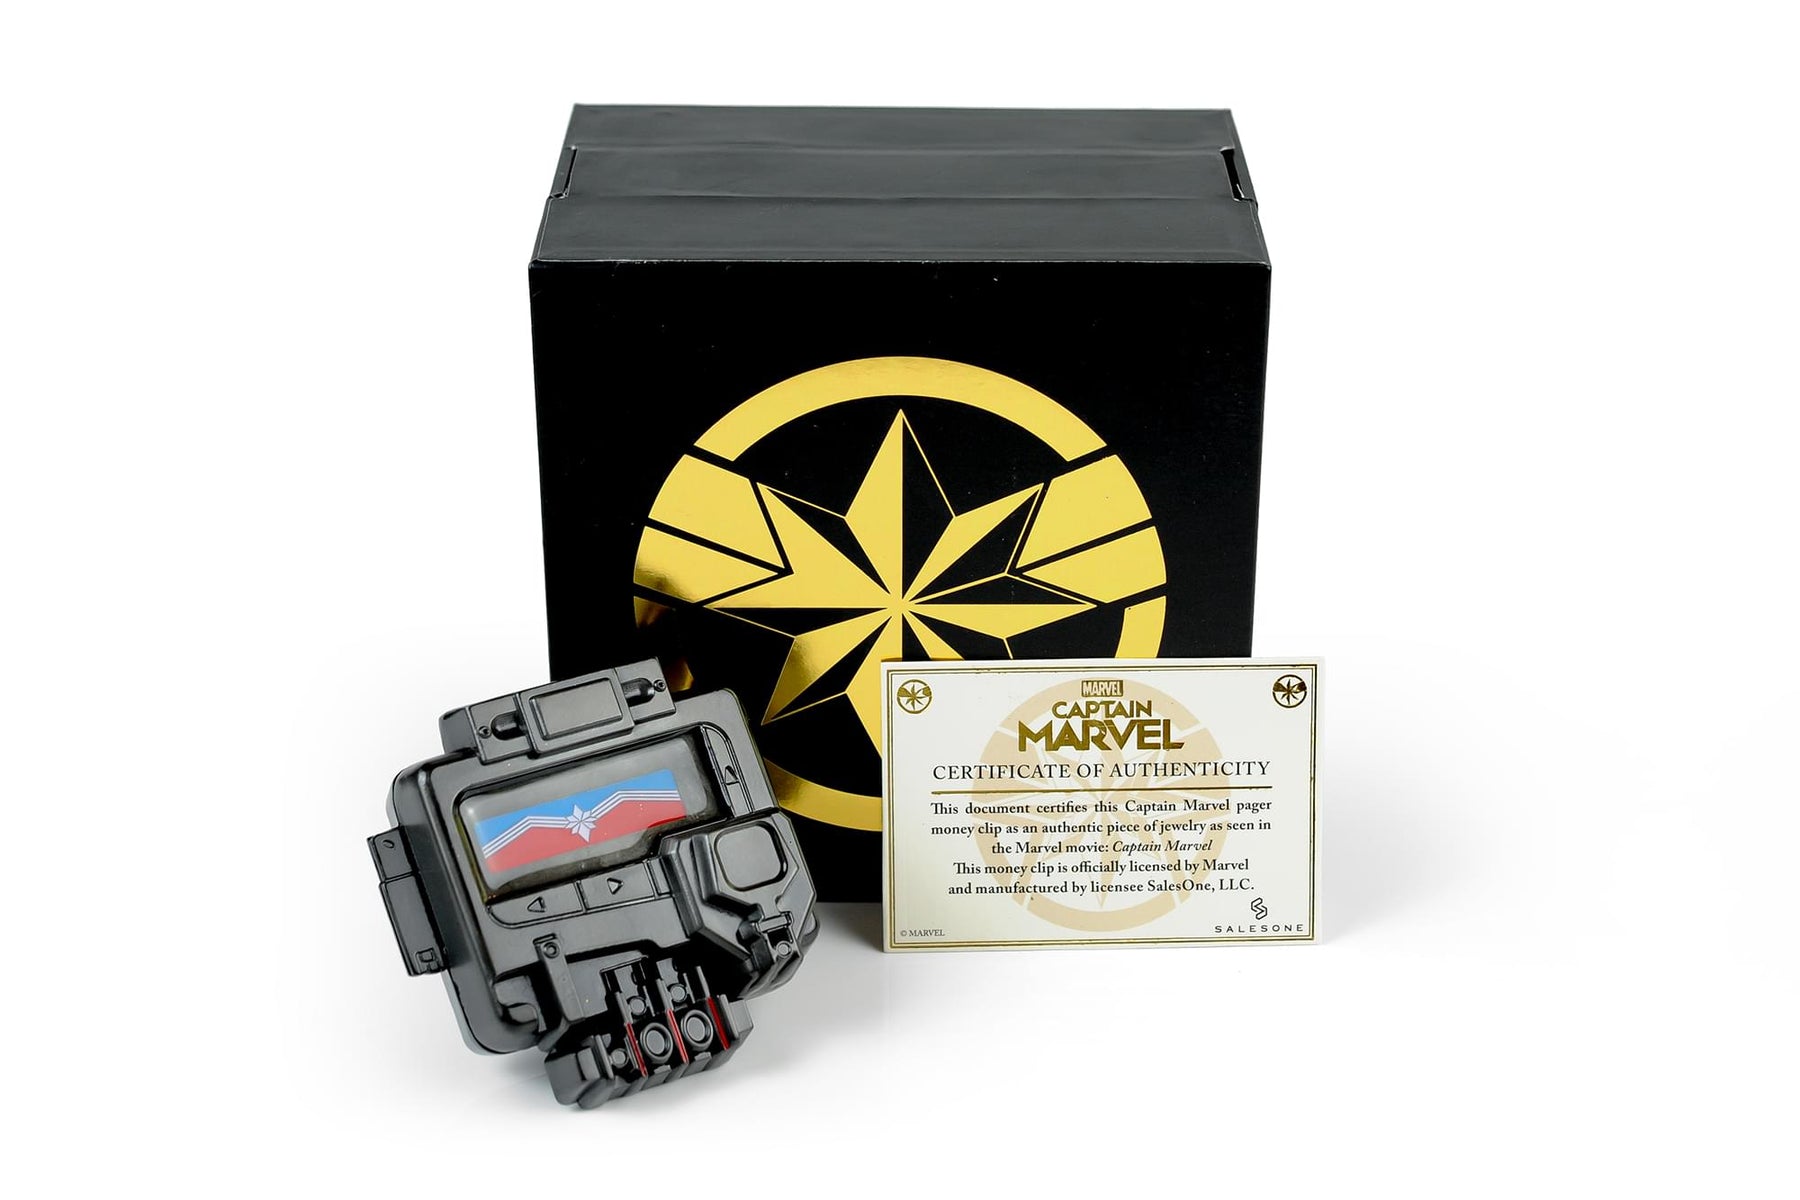 Marvel Captain Marvel Nick Fury's Pager Money Clip | Exclusive Marvel Wallet